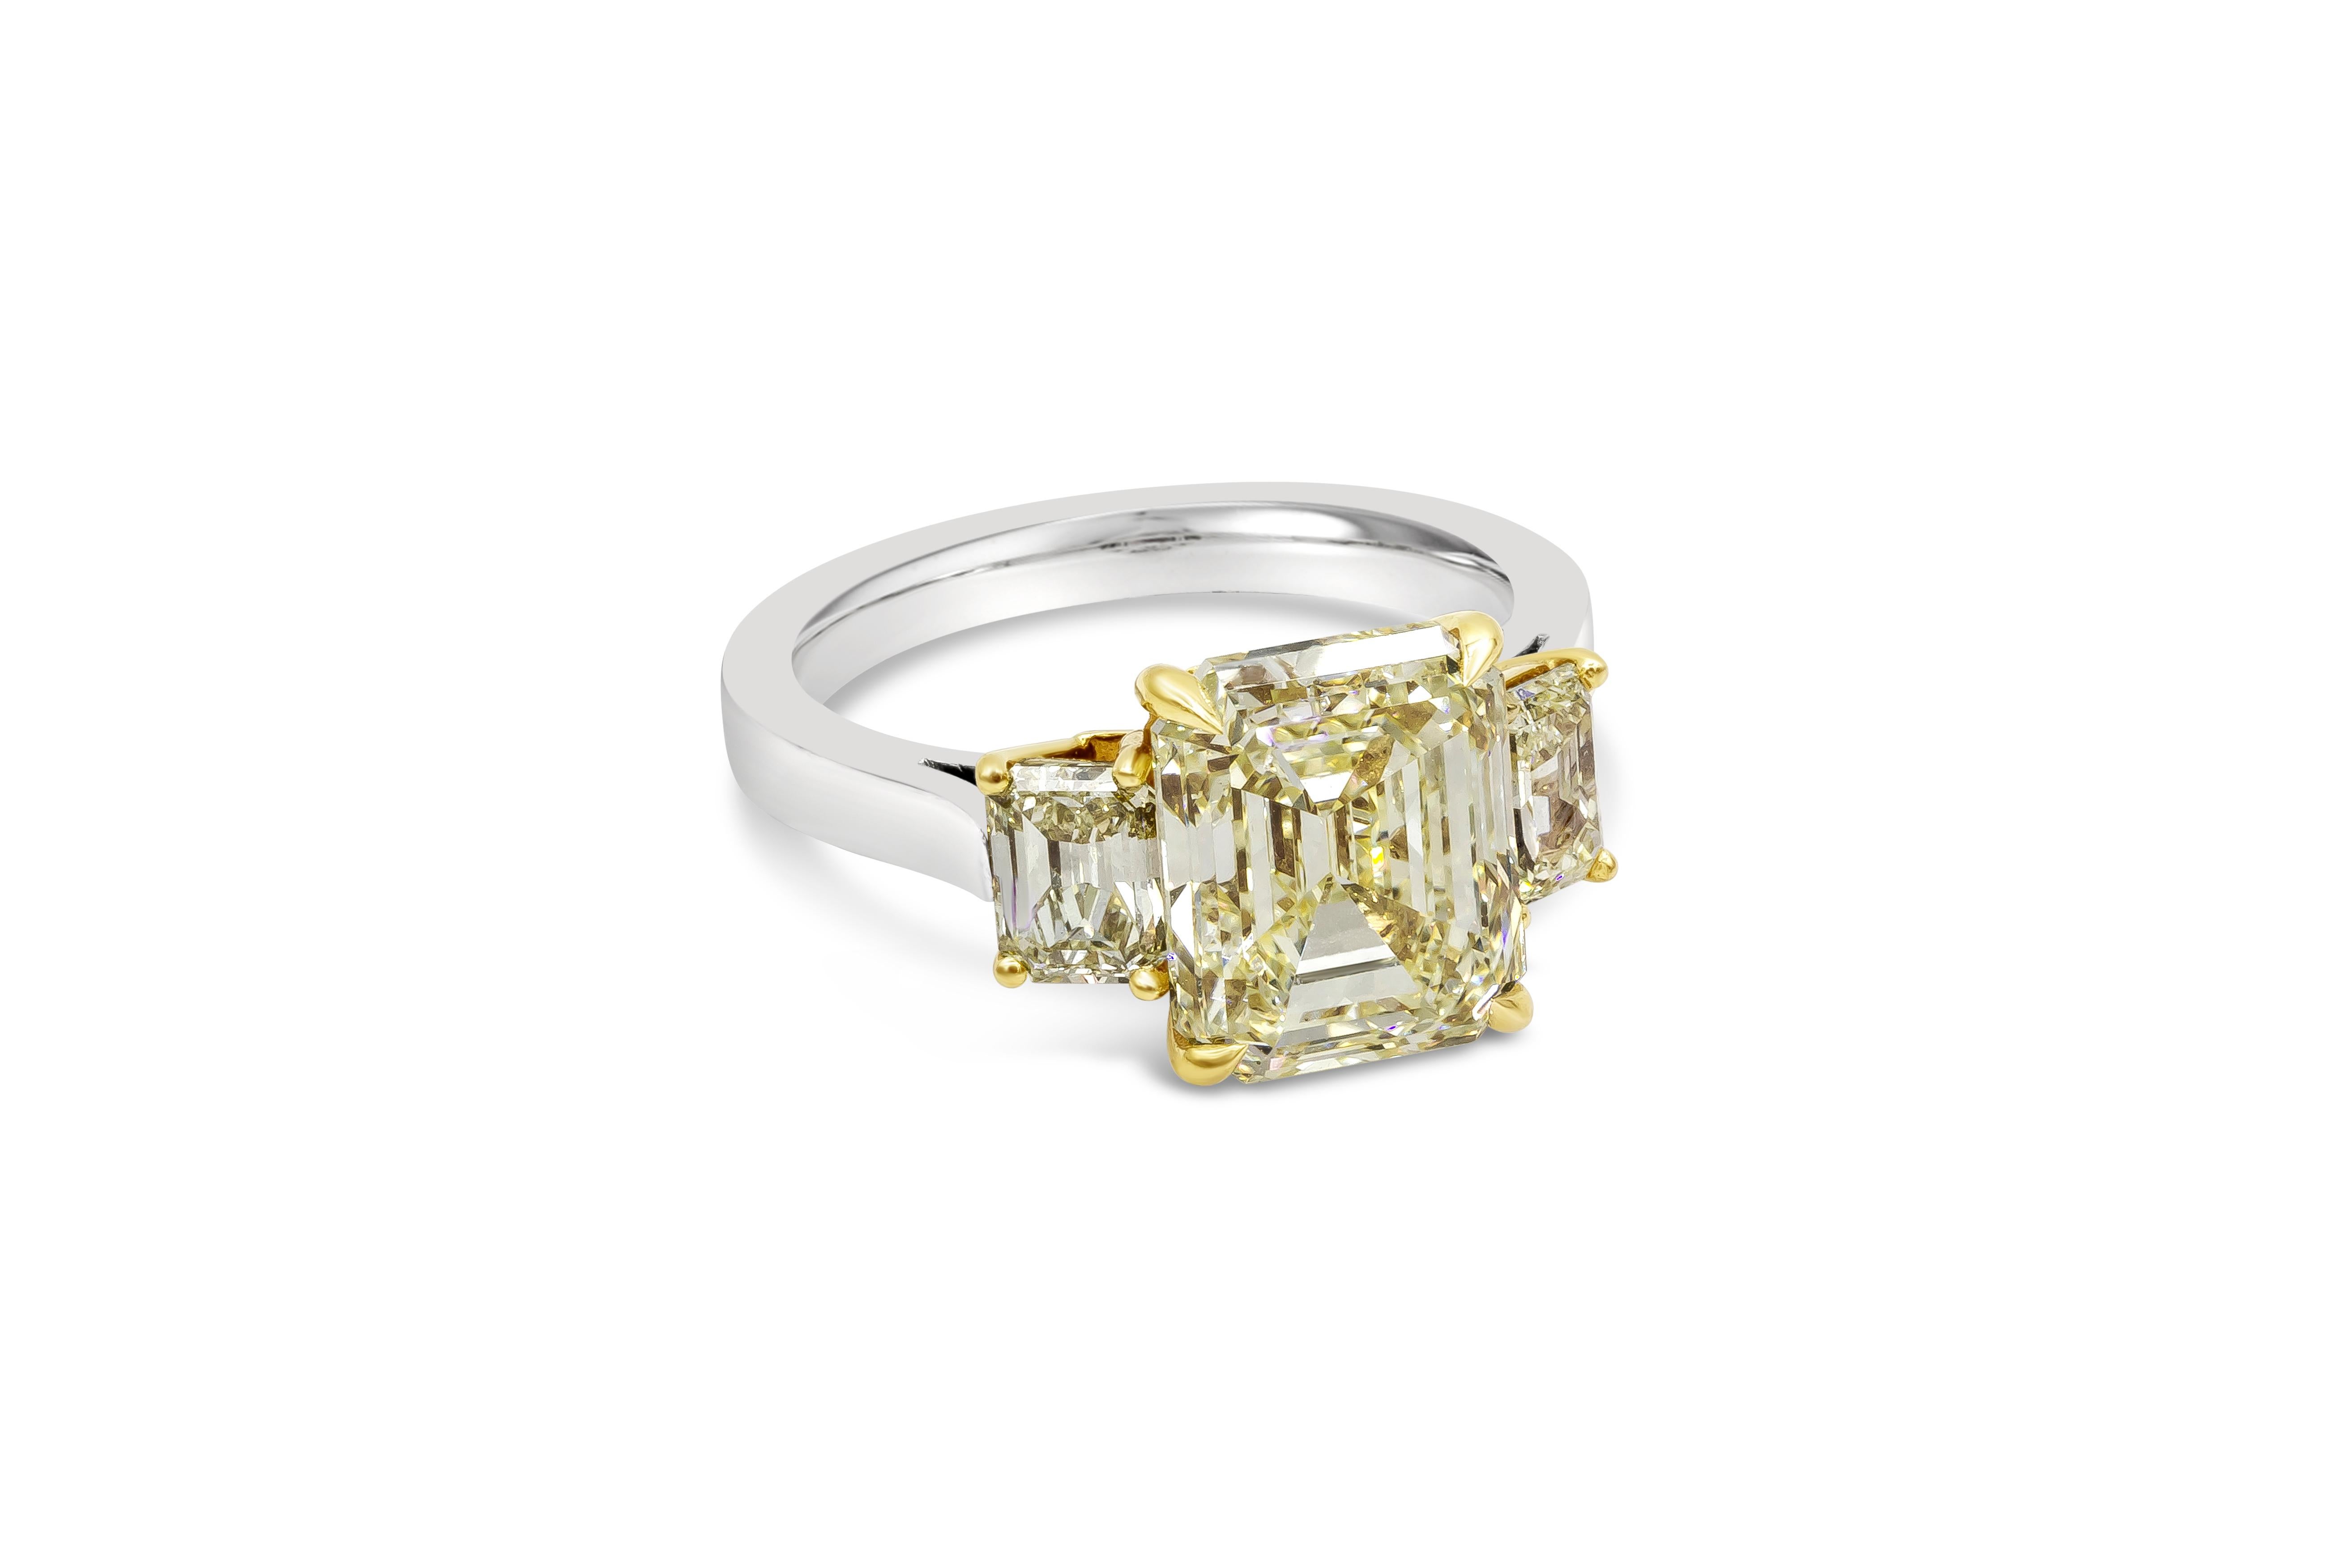 A rare and spectacular engagement ring showcasing a 5.17 carats emerald cut diamond center stone certified by GIA as fancy yellow color and VS1 in clarity. Flanked by two small emerald cut fancy yellow diamonds on each side weighing 1.17 carats